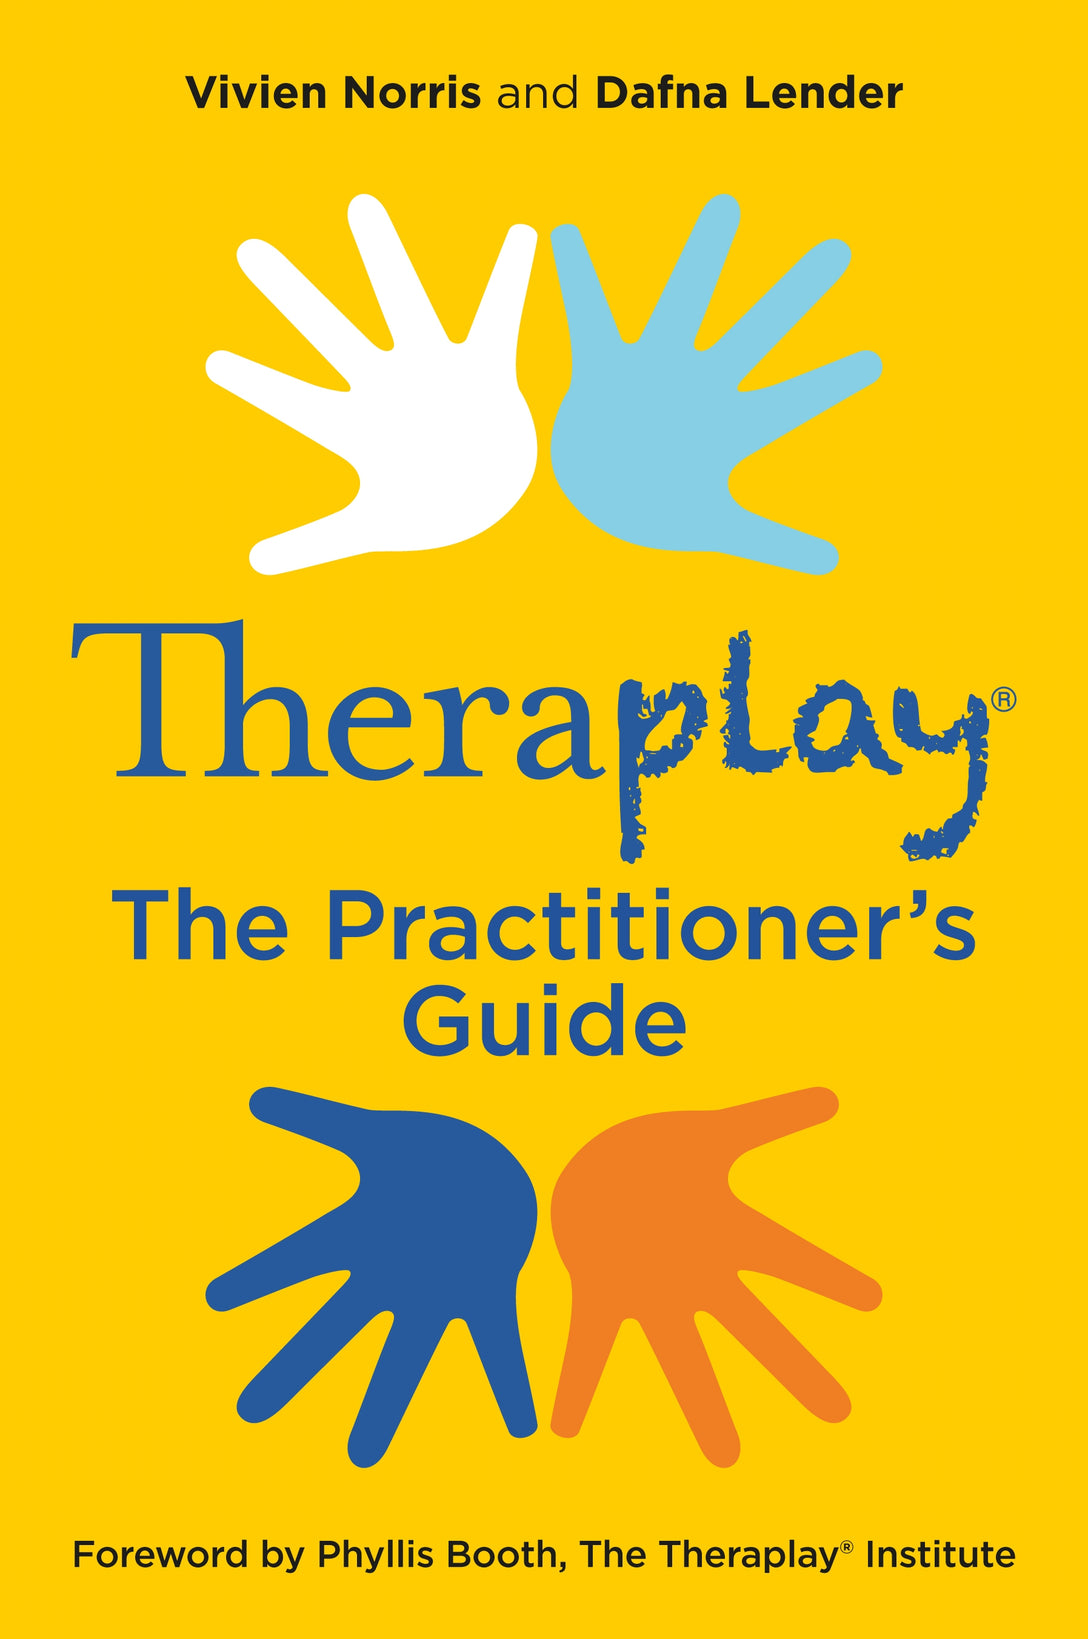 Theraplay® – The Practitioner's Guide by Vivien Norris, Phyllis Booth, Dafna Lender